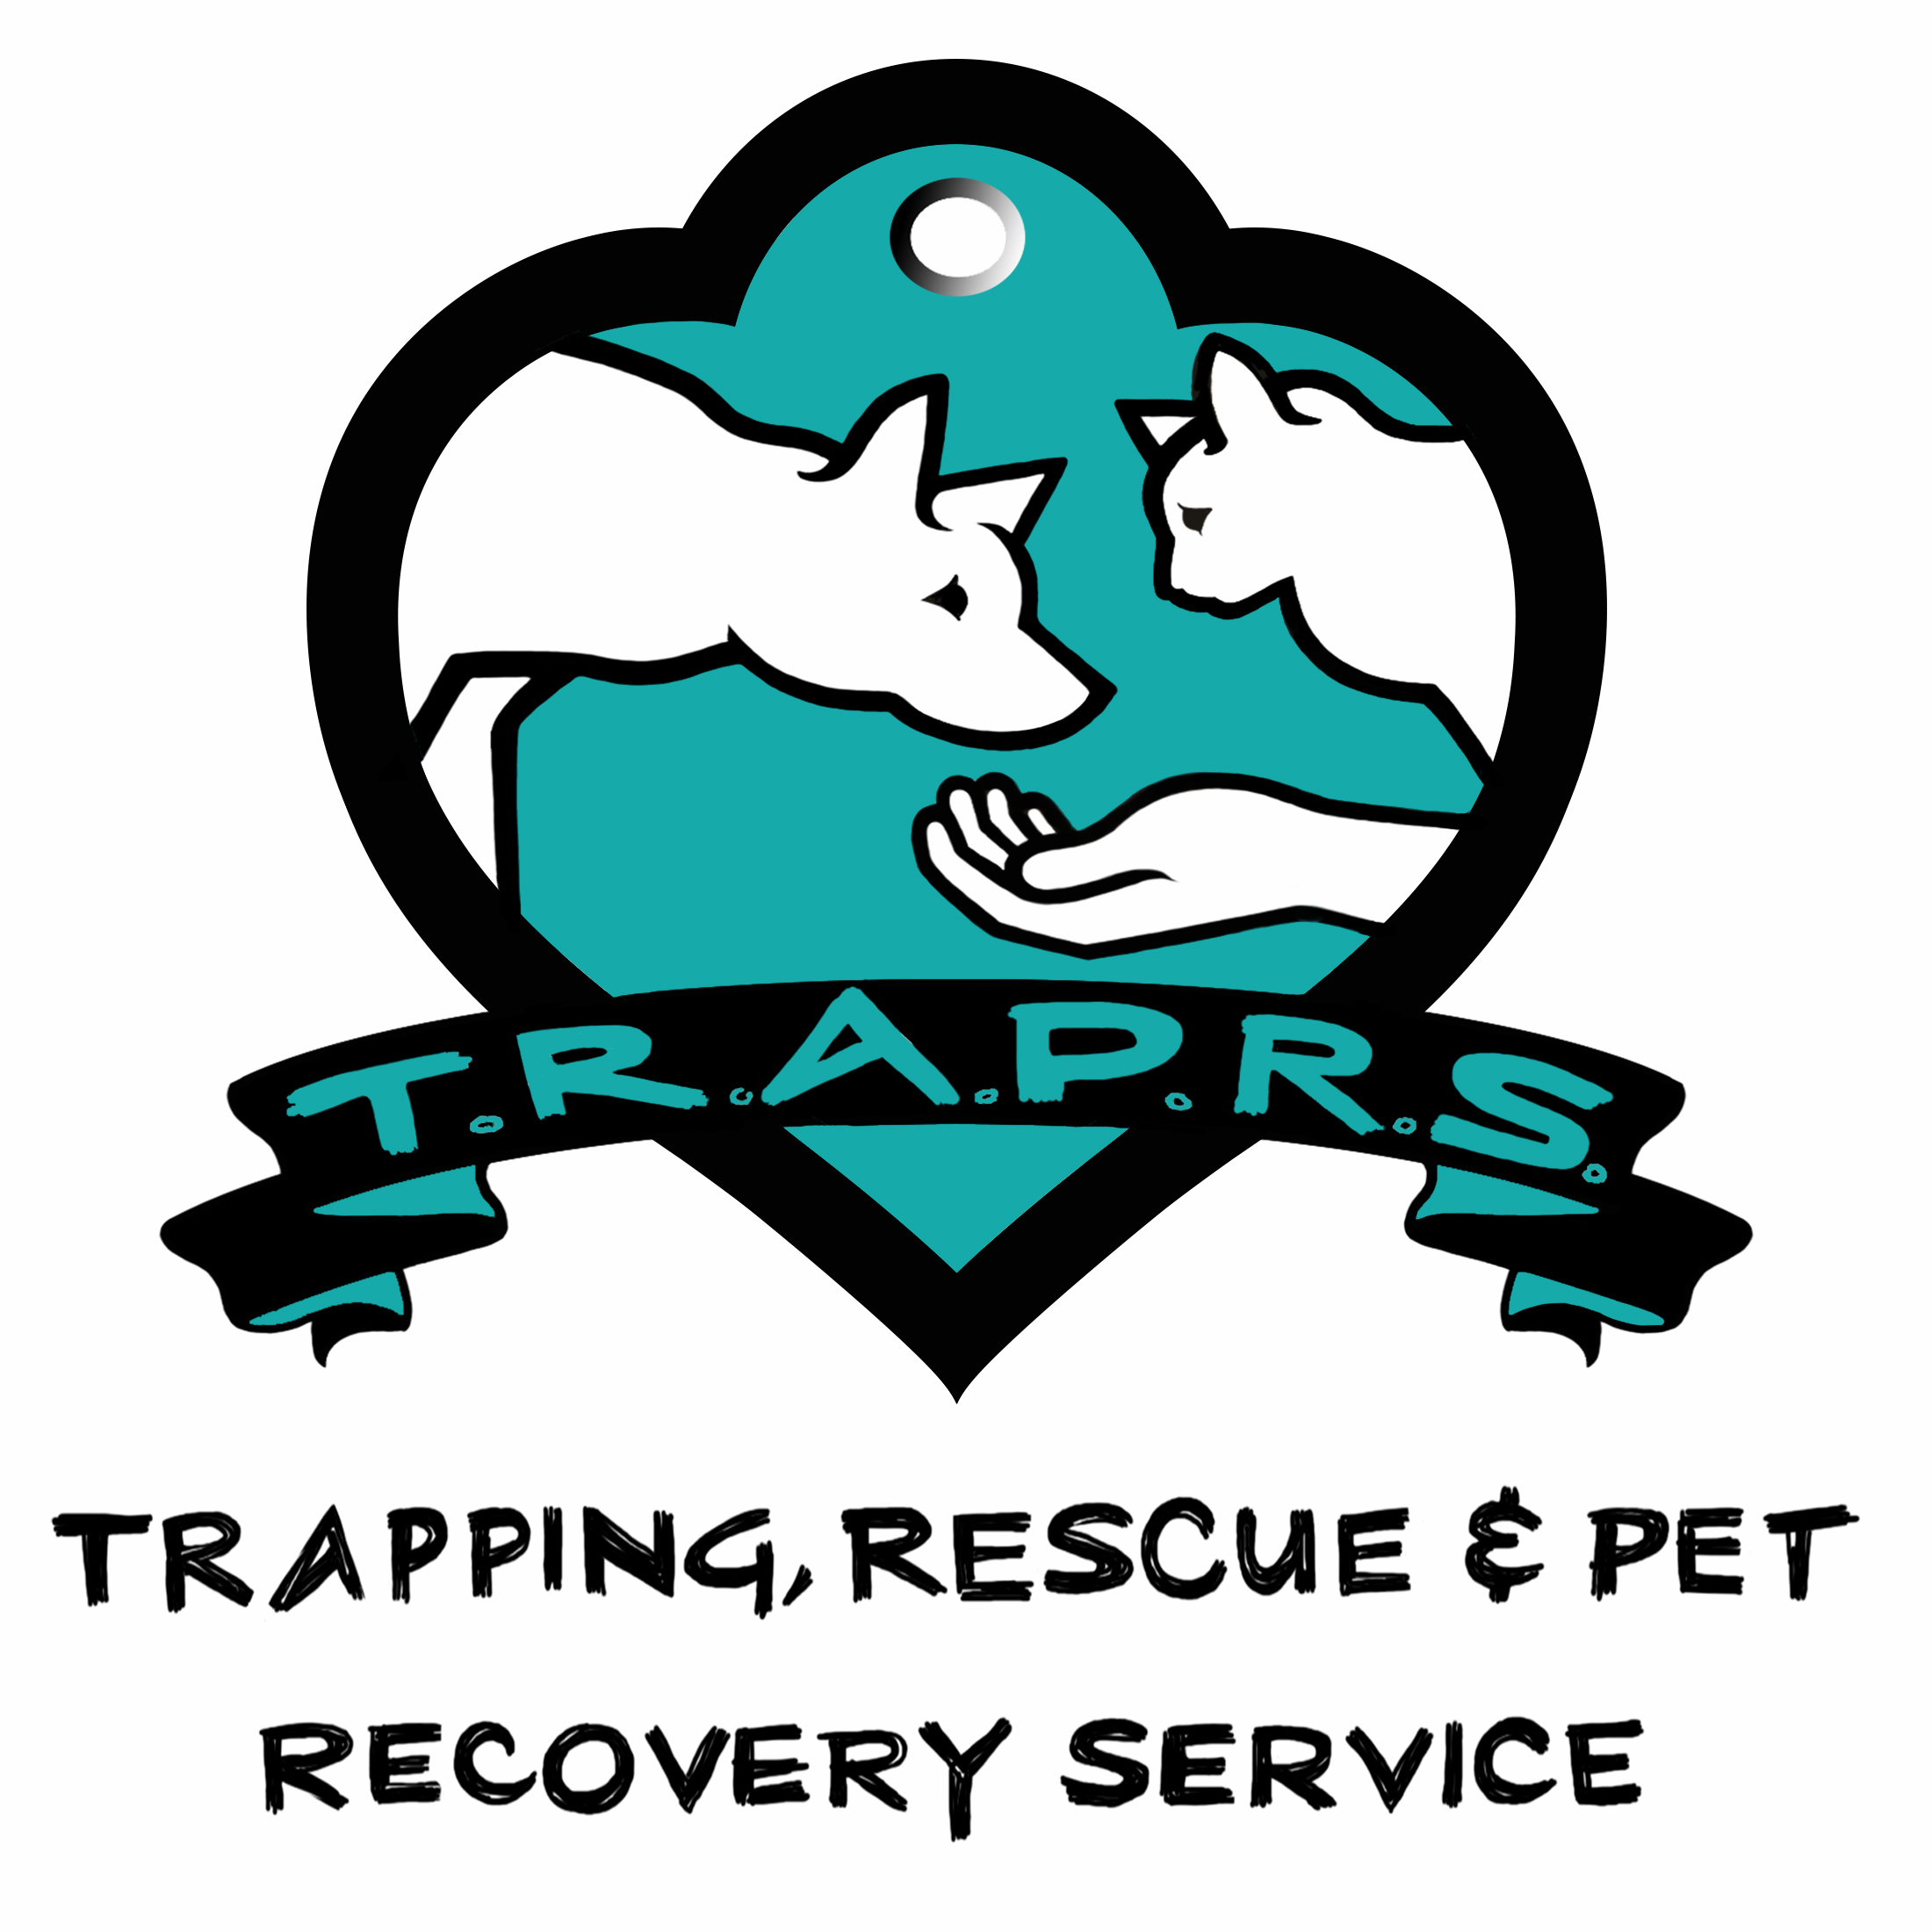 The TRAPRS - Trapping, Rescue, and Pet Recovery Service